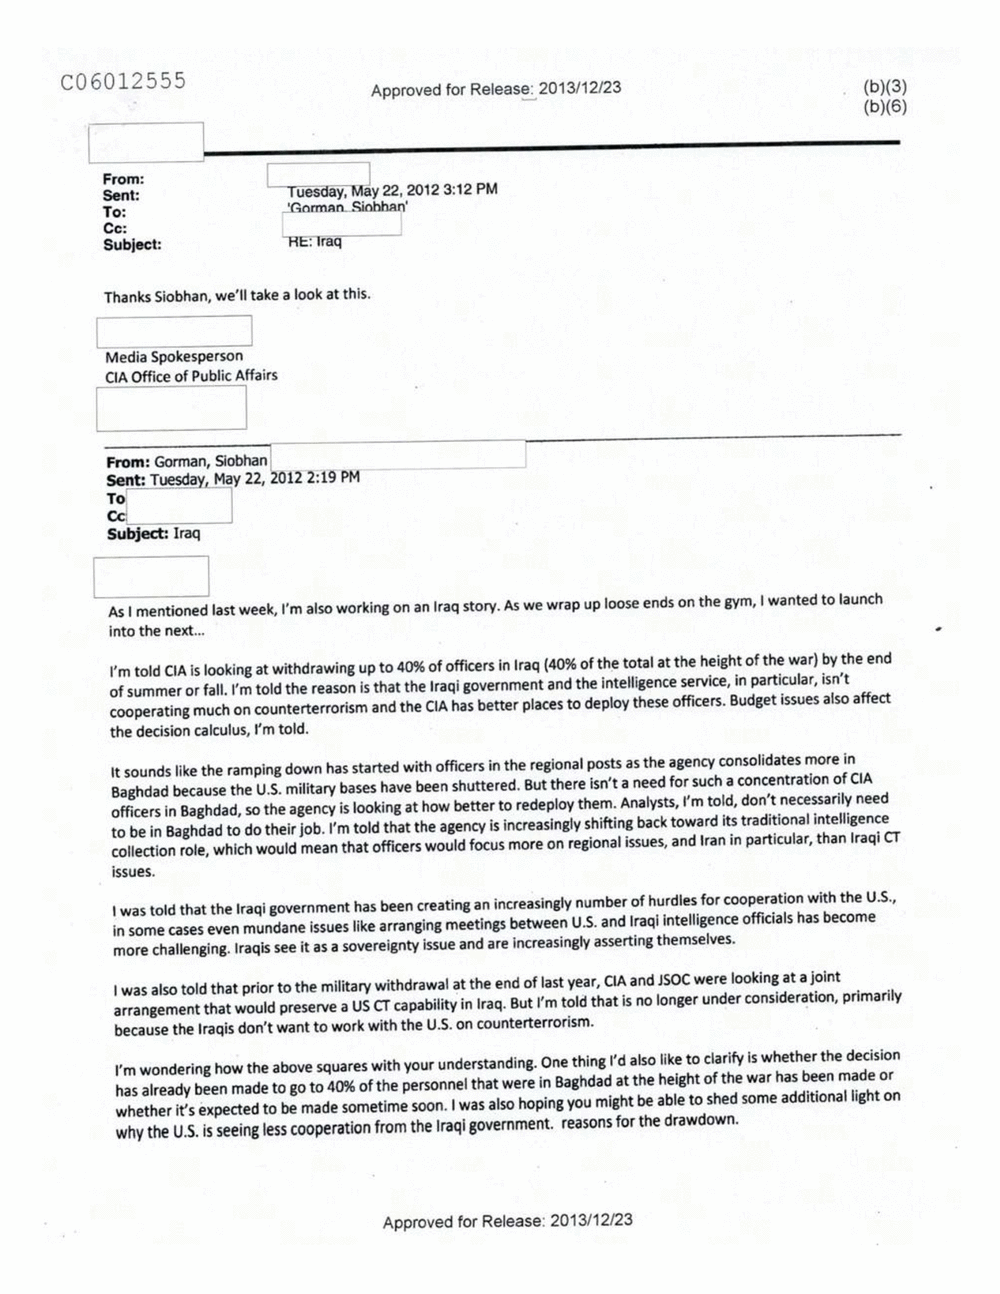 Page 154 from Email Correspondence Between Reporters and CIA Flacks